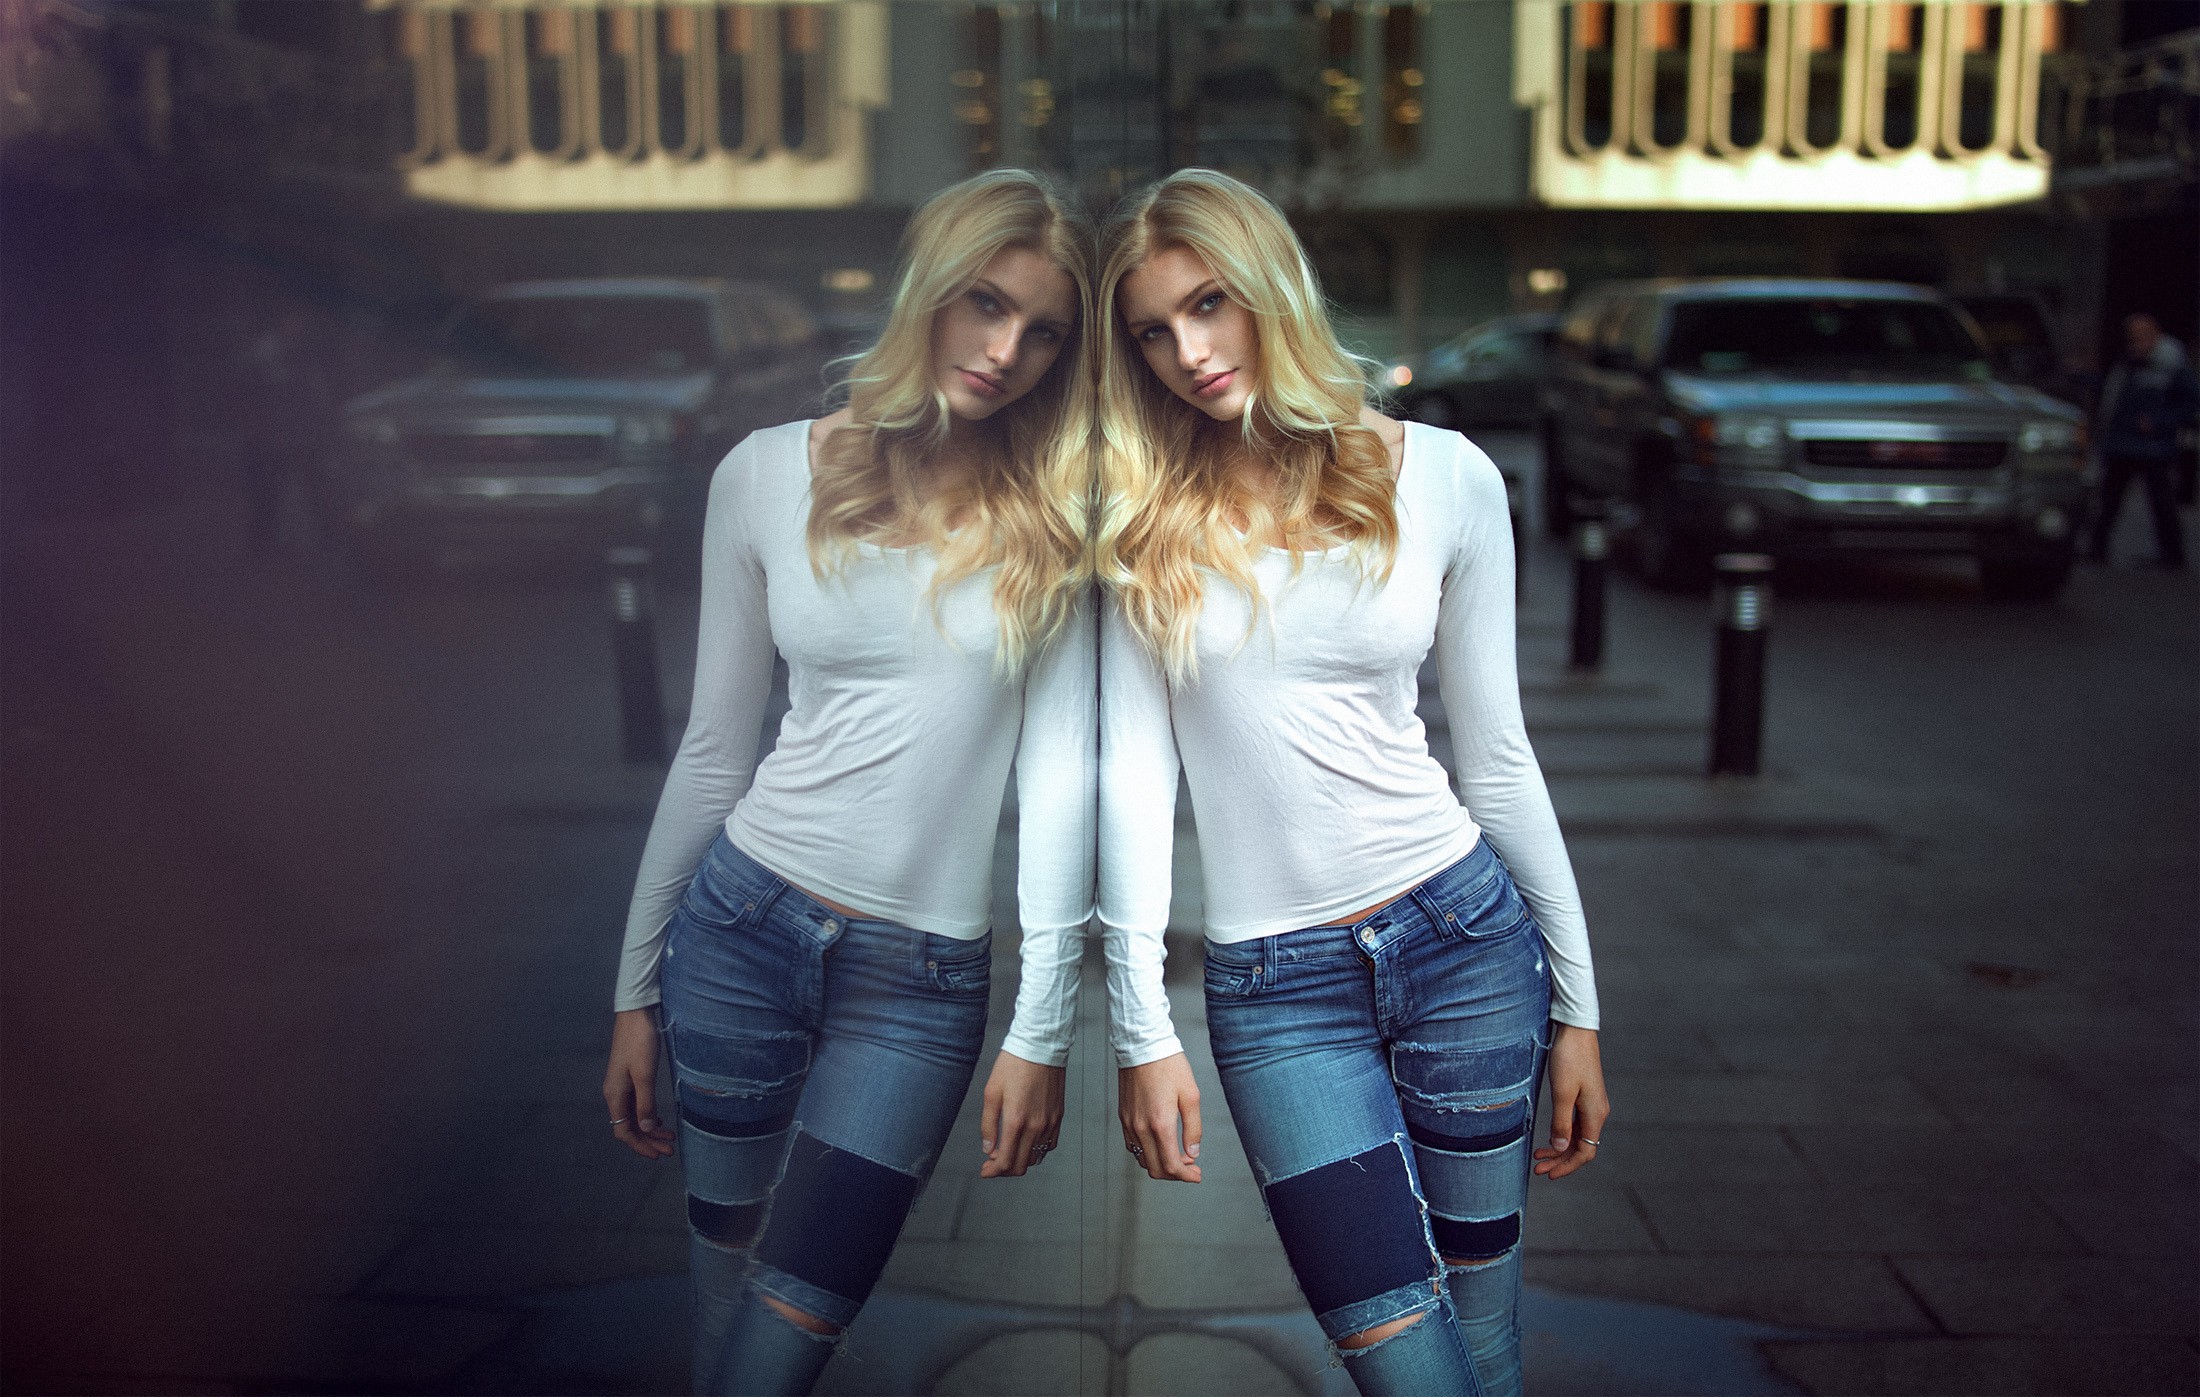 People 2200x1397 women blonde depth of field reflection urban torn jeans white tops women outdoors city looking at viewer model slim body car street long hair dyed hair jeans